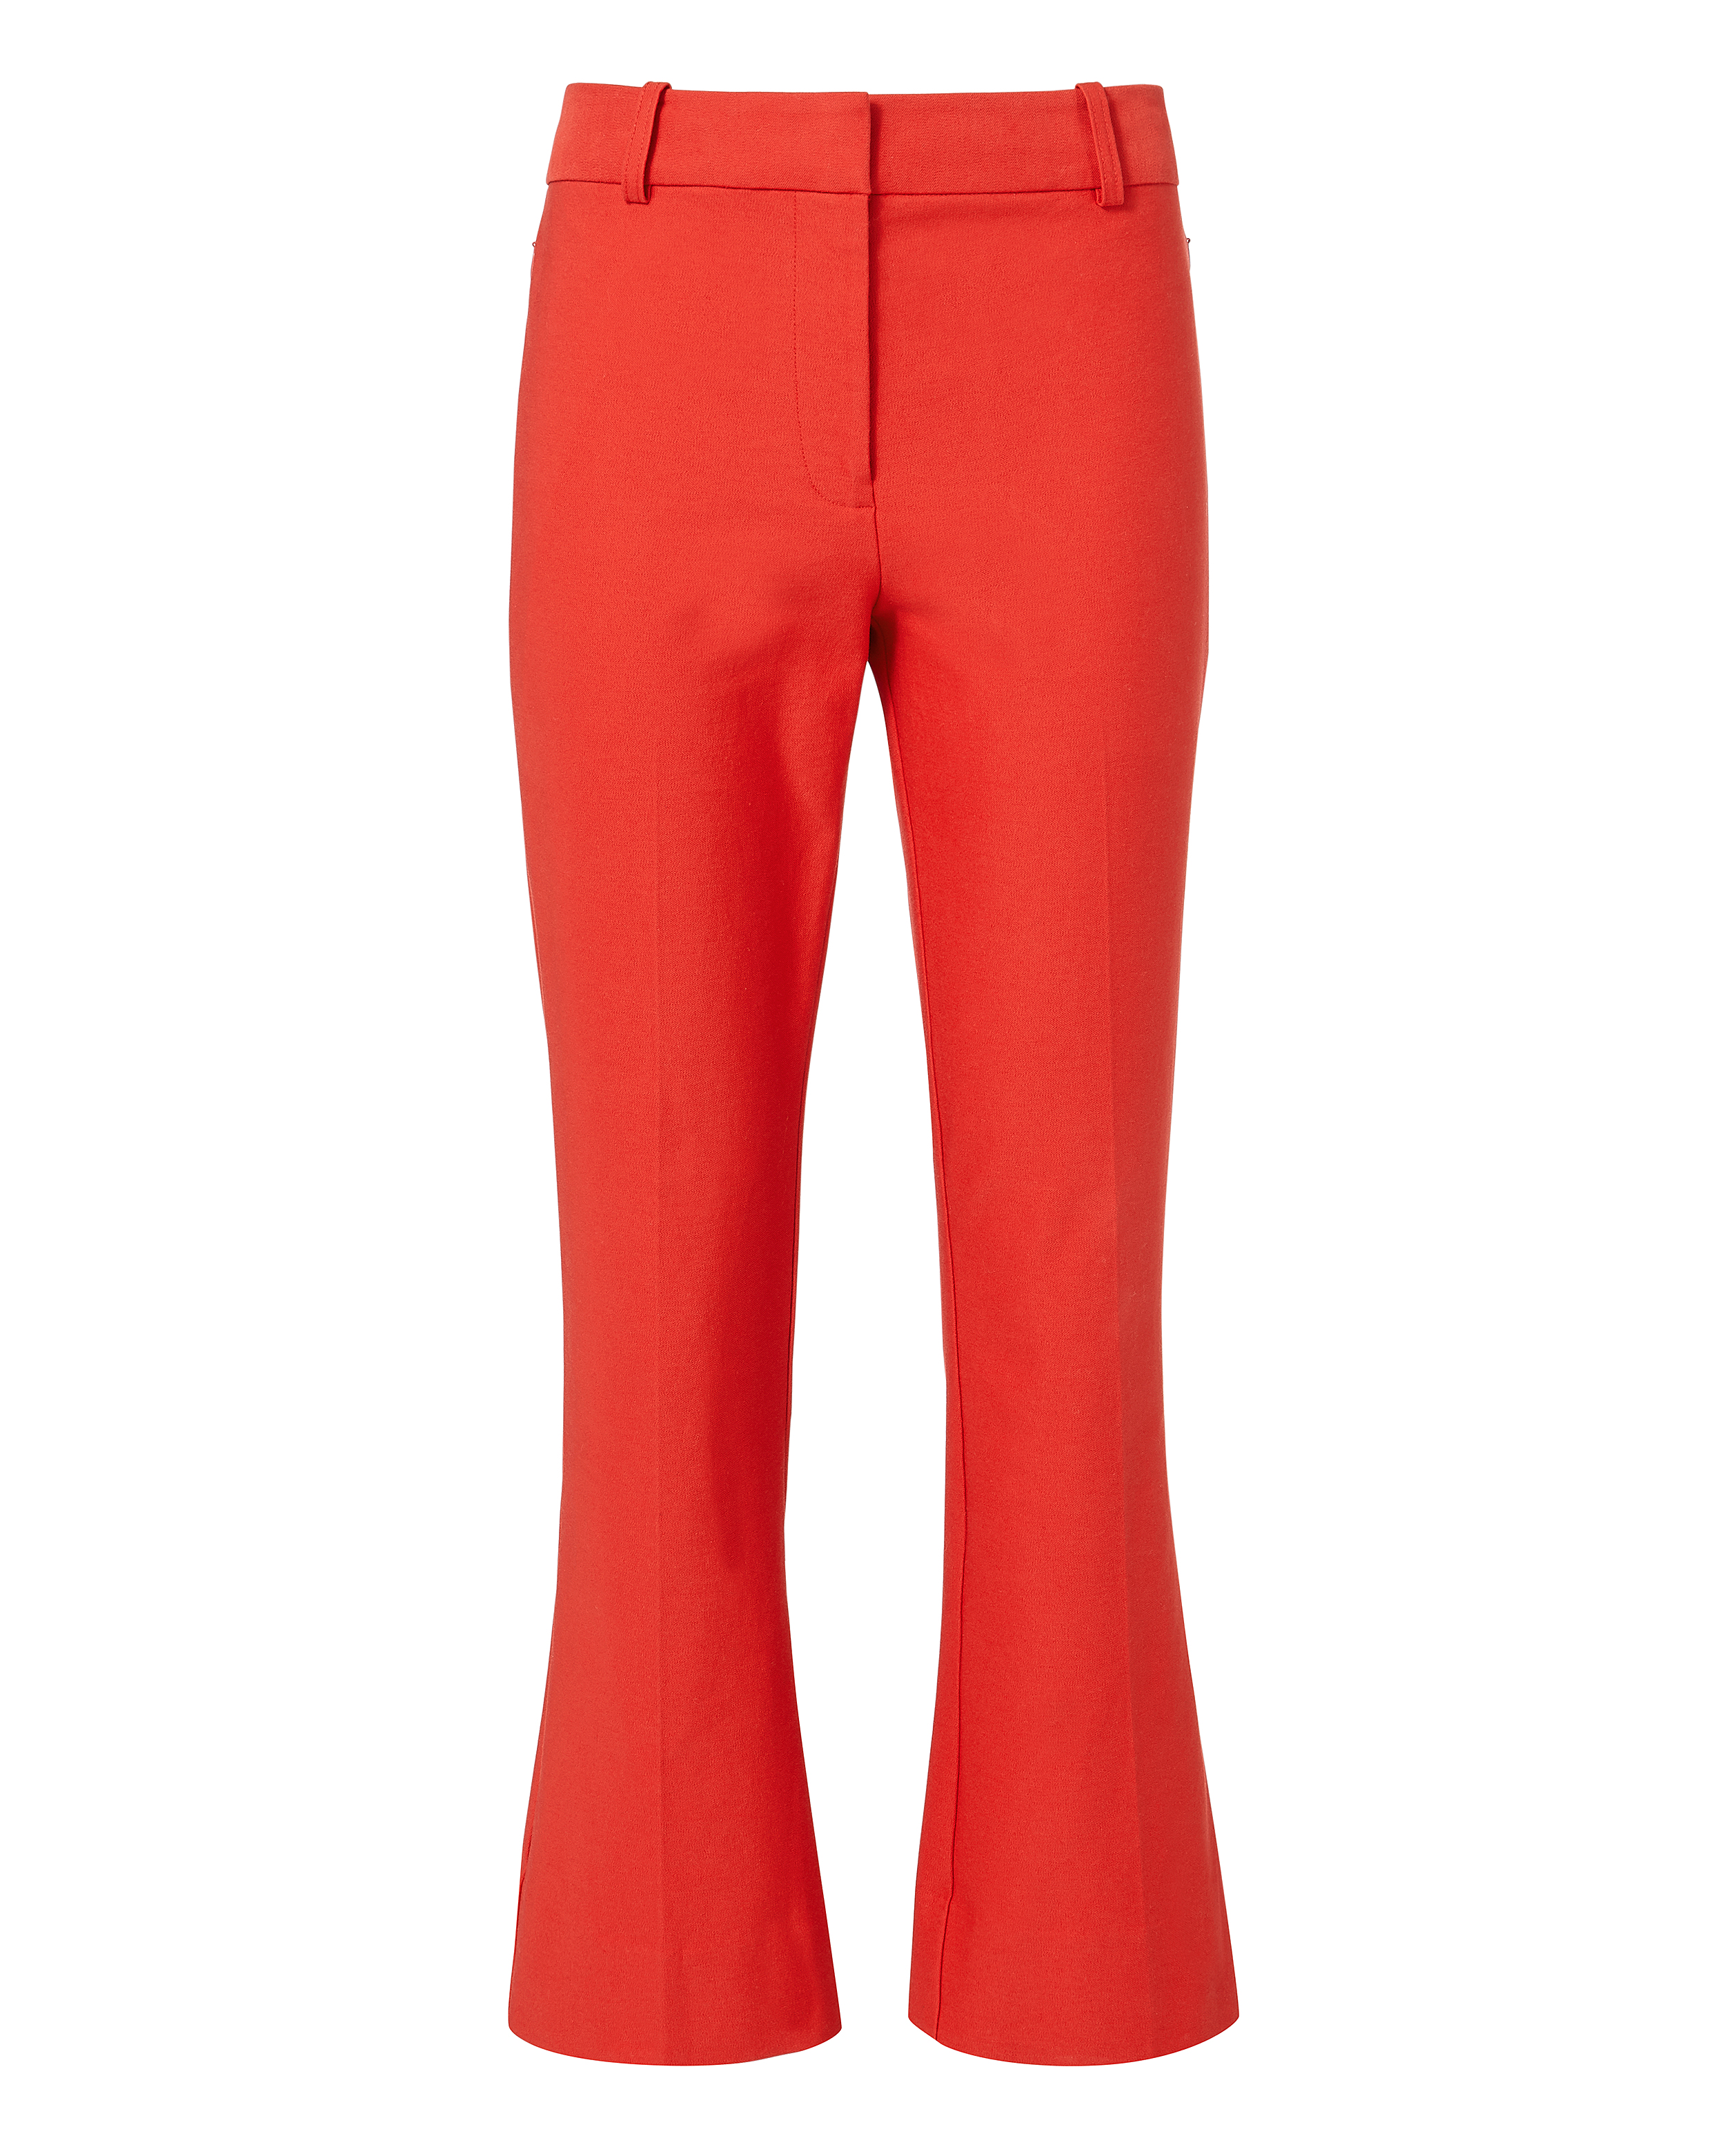 Red Crop Flare Pants